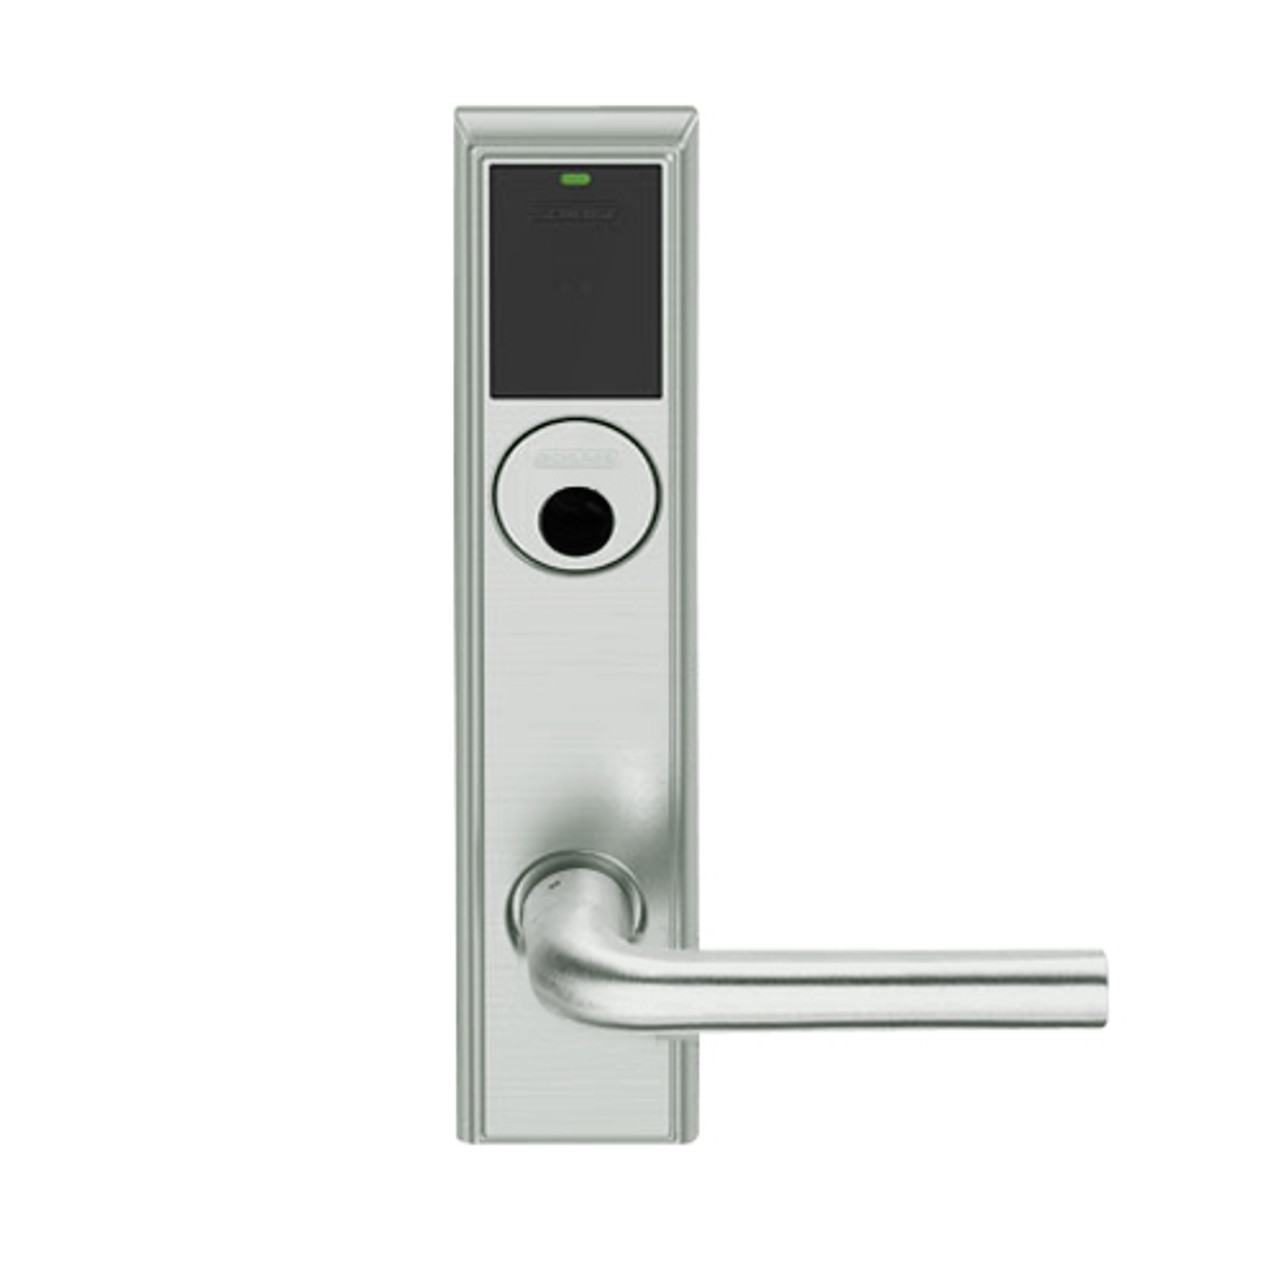 LEMD-ADD-L-02-619 Schlage Less Mortise Cylinder Privacy/Apartment Wireless Addison Mortise Deadbolt Lock with LED and 02 Lever in Satin Nickel